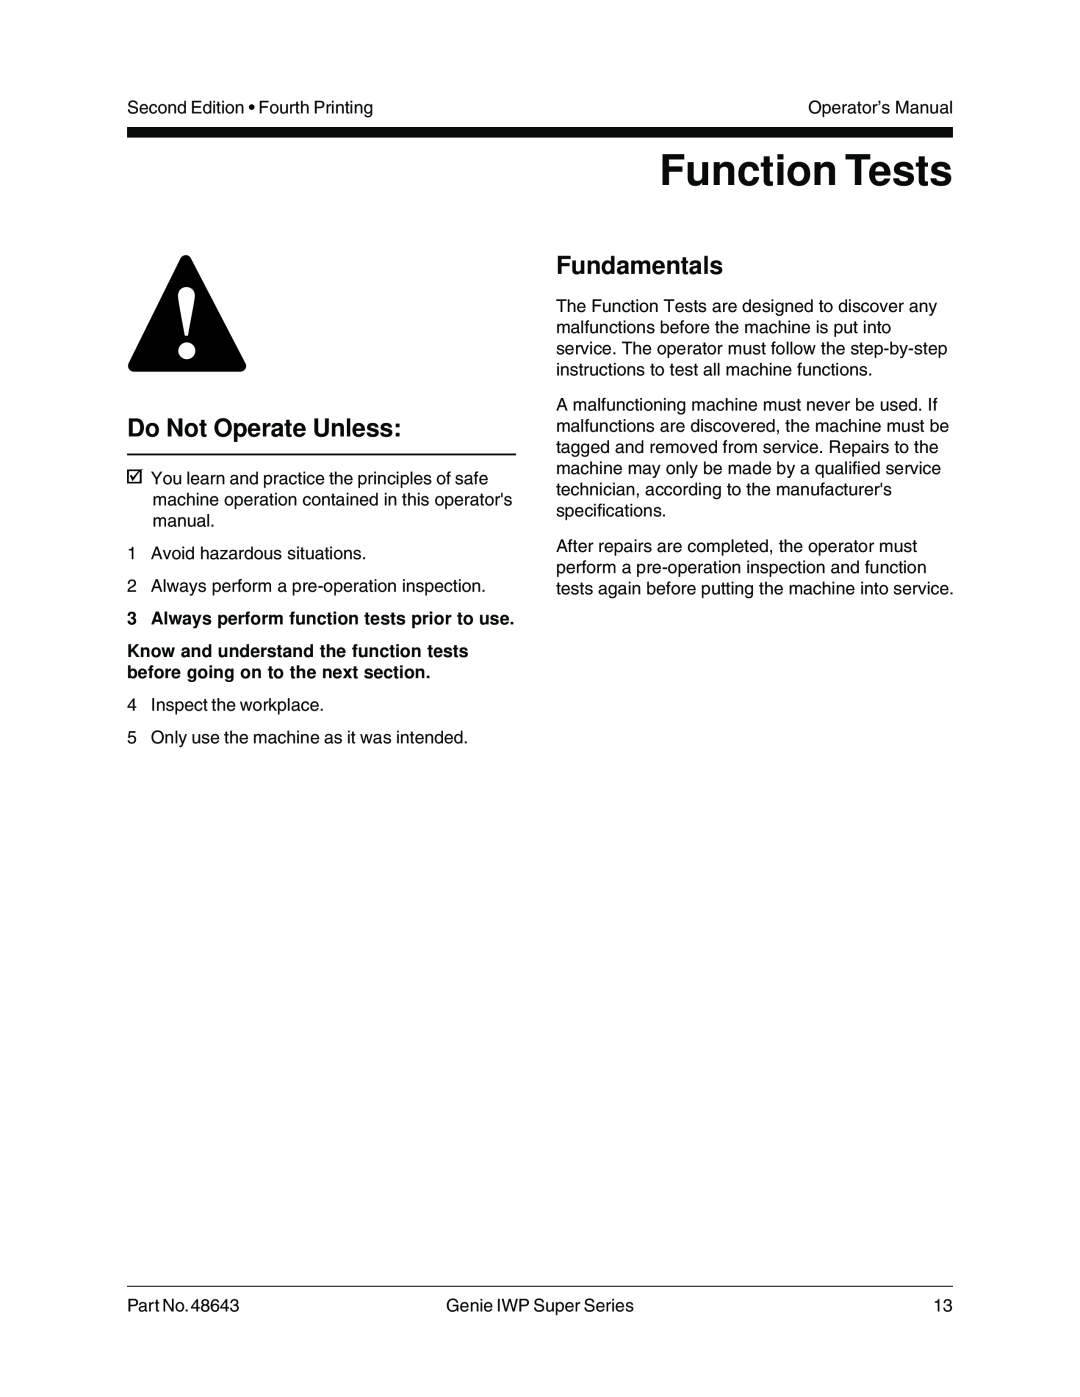 Genie 48643 manual Function Tests, 3Always perform function tests prior to use, Do Not Operate Unless, Fundamentals 